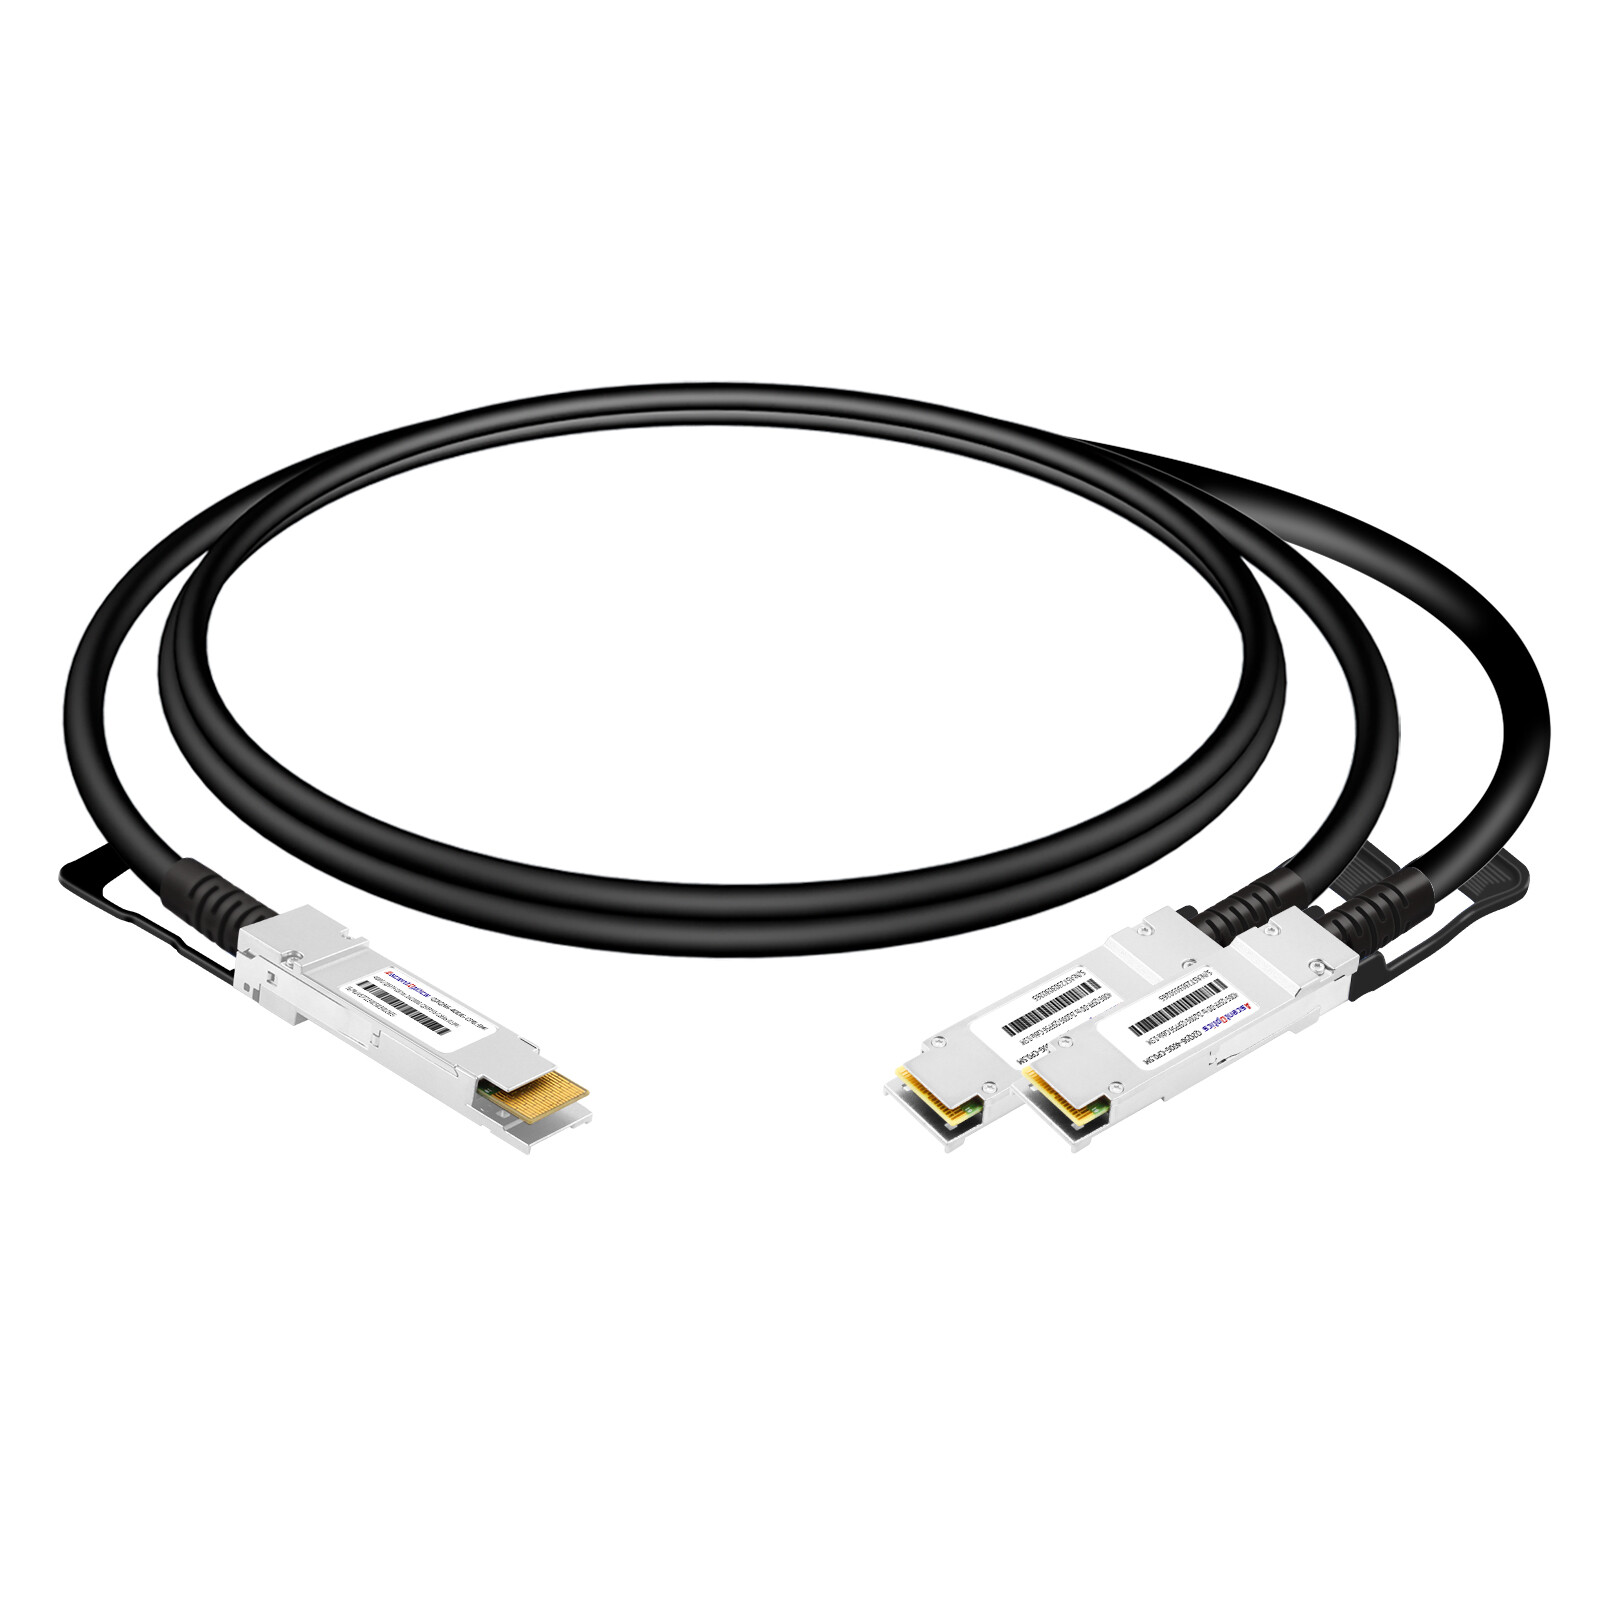 400G QSFP-DD to 2x 200G QSFP56 Copper Breakout Cable,2.5 Meters,Passive